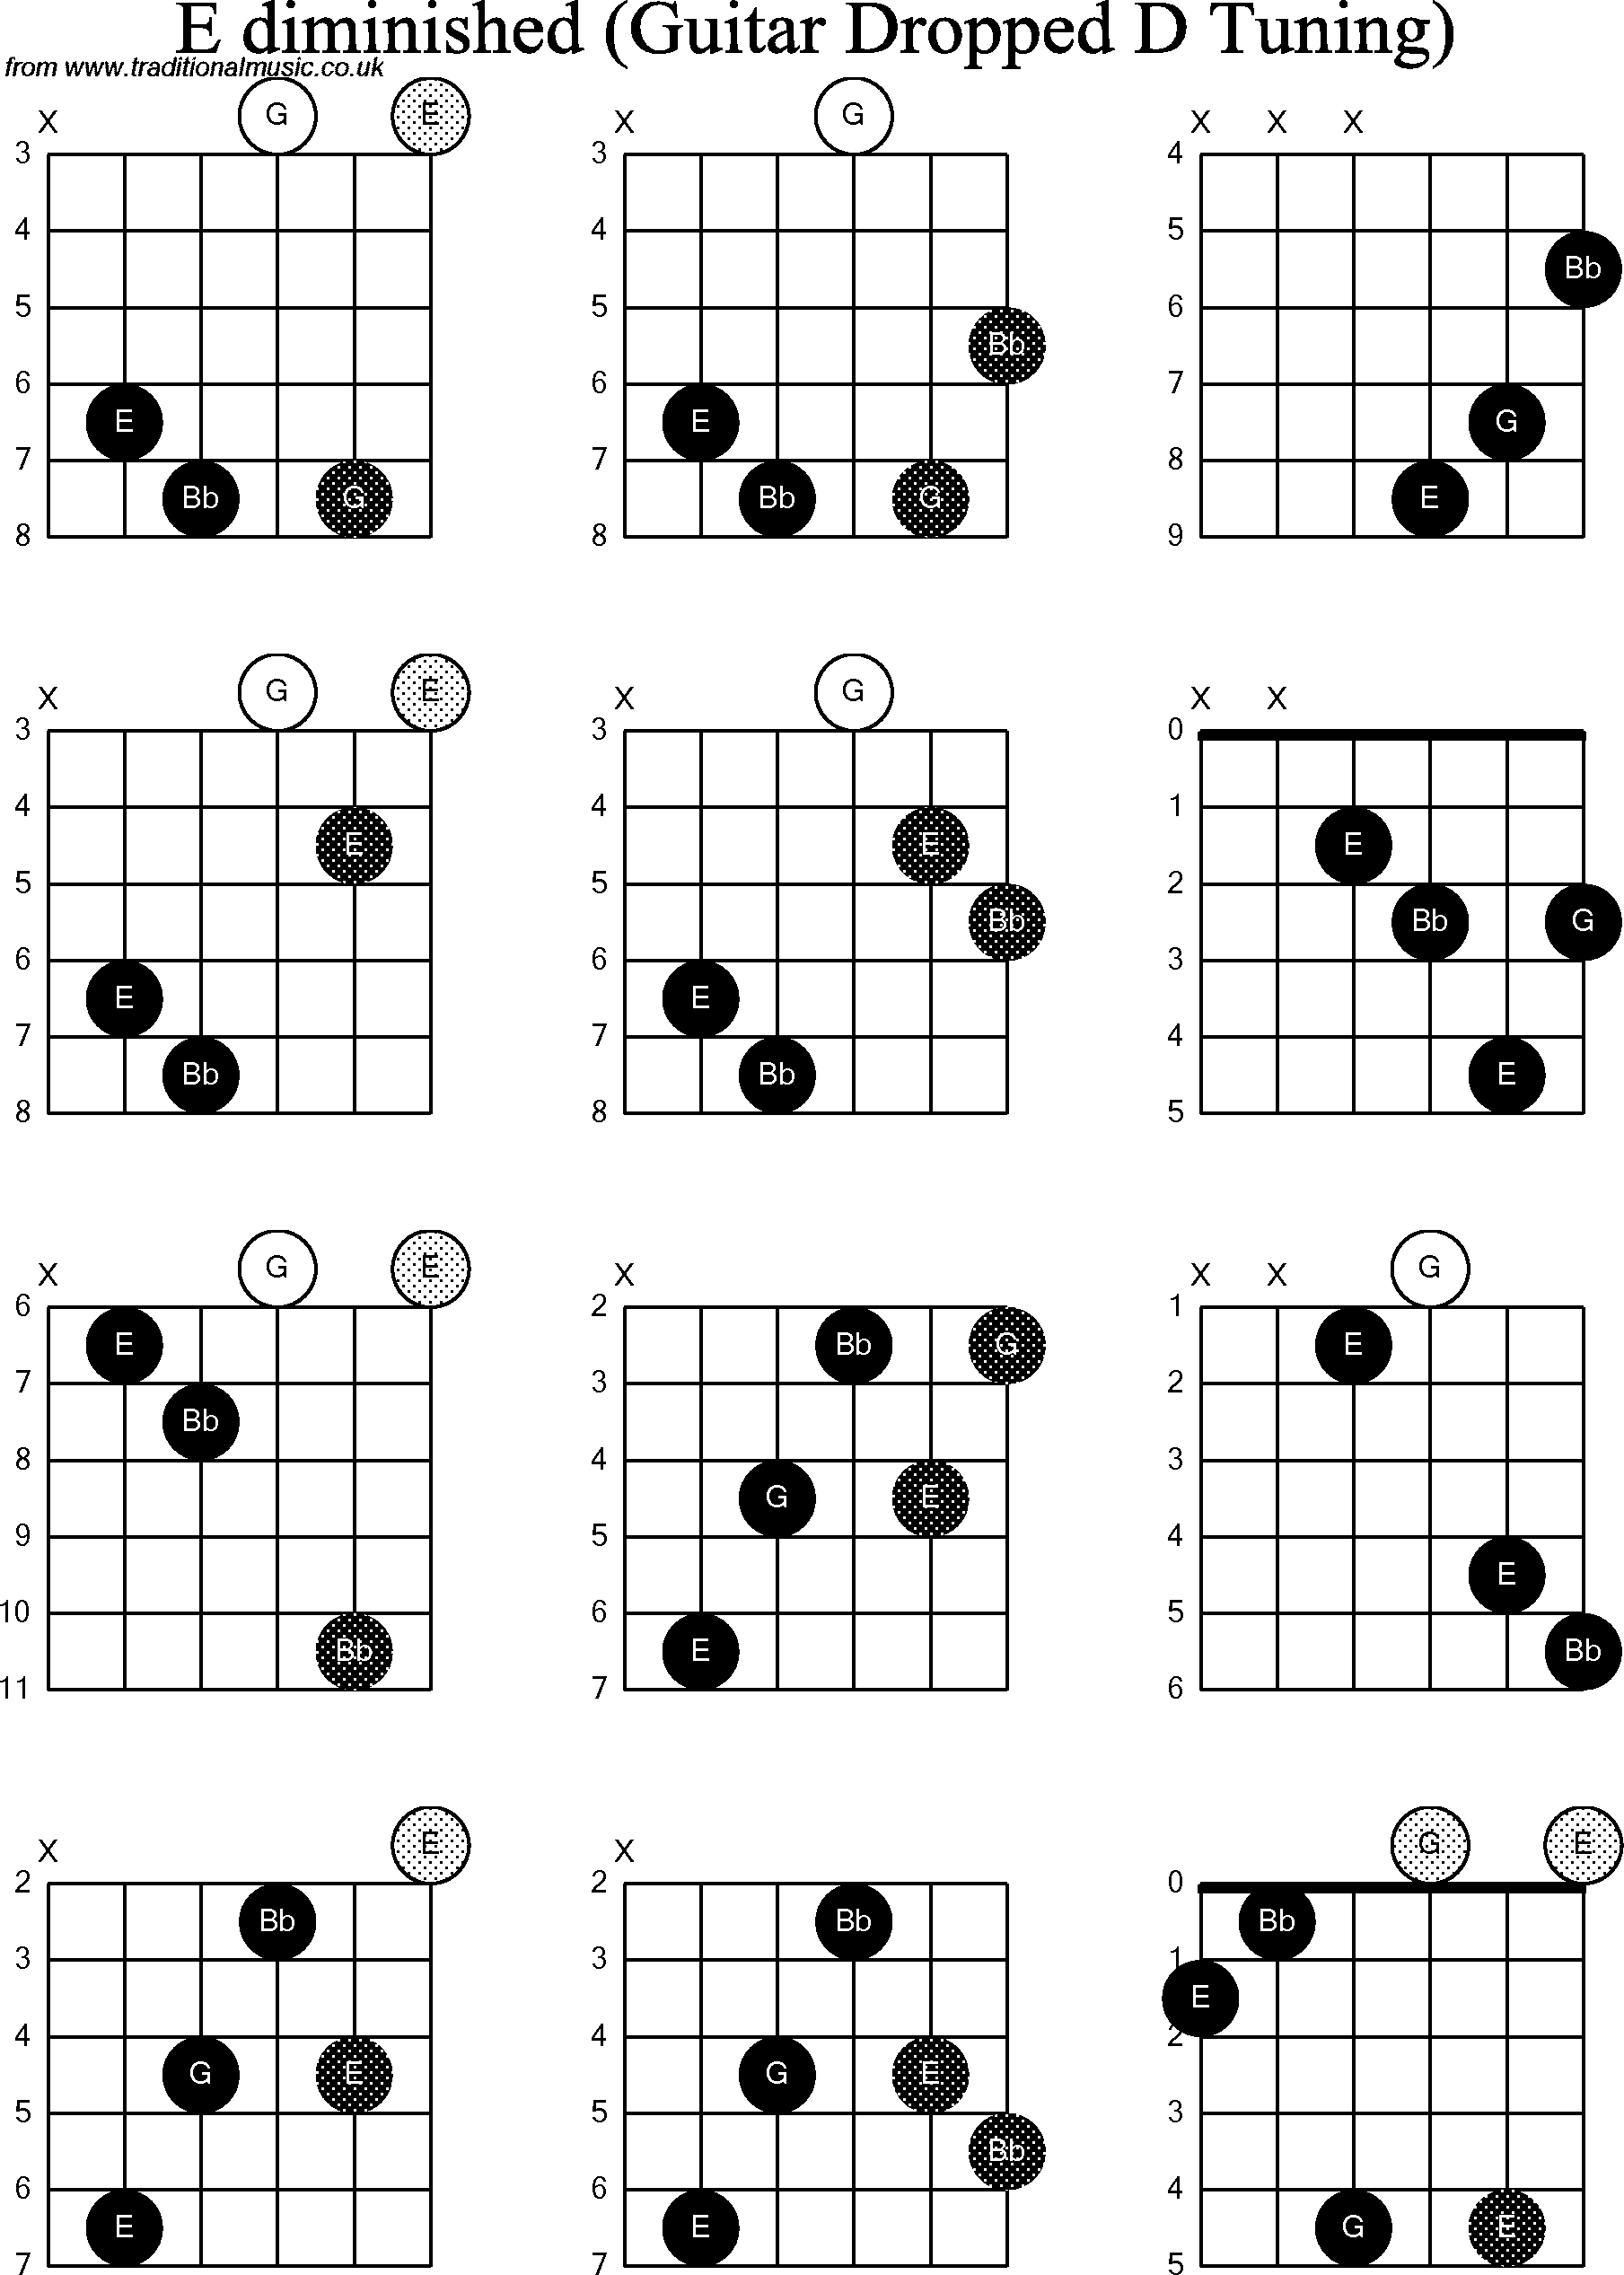 Chord diagrams for dropped D Guitar(DADGBE), E Diminished